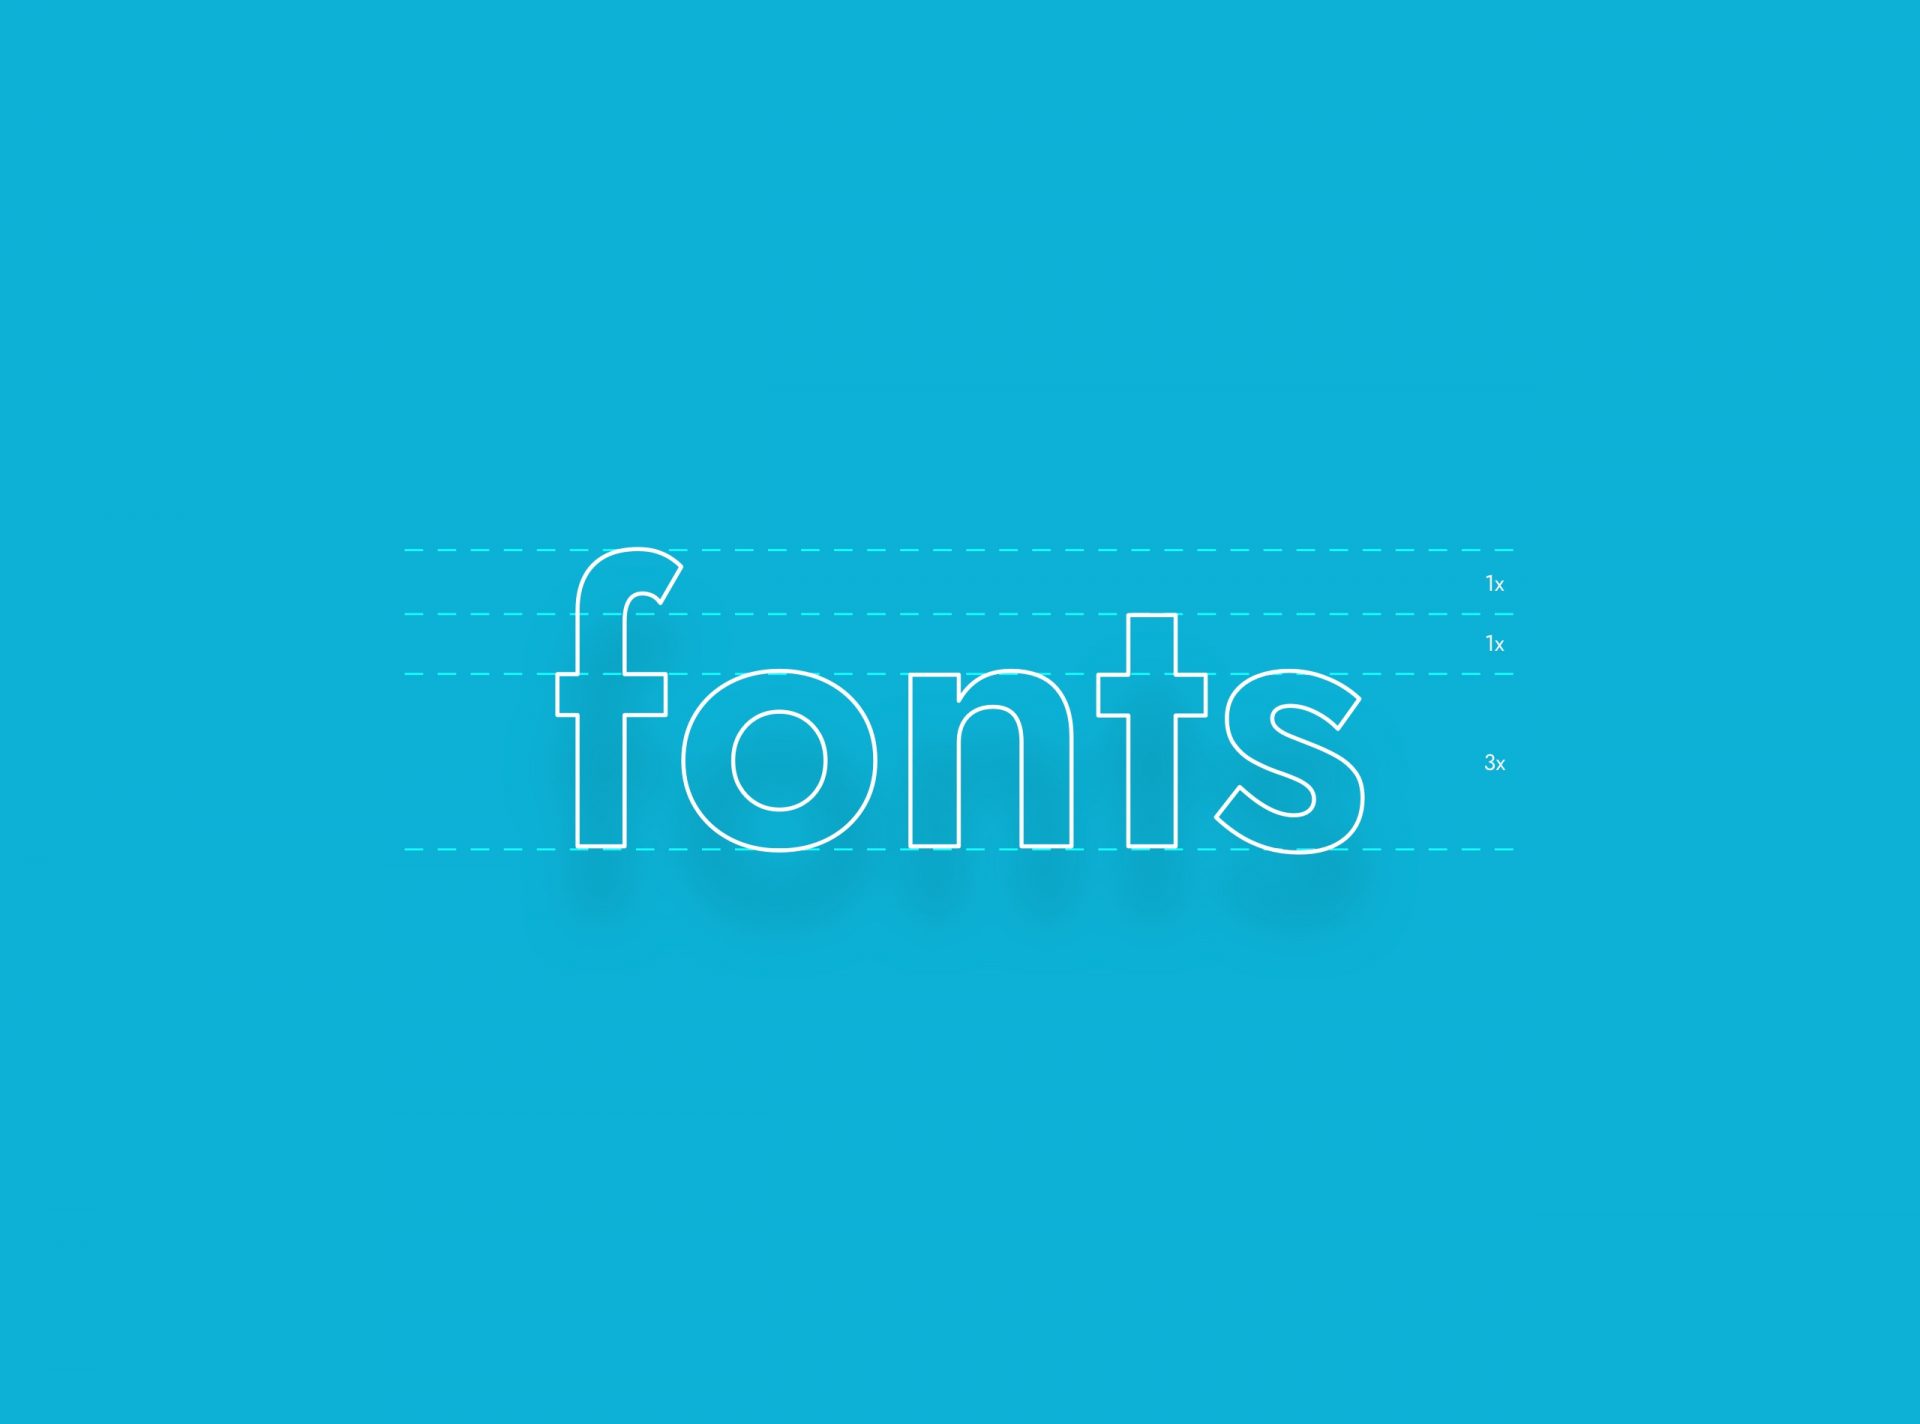 10 best Google fonts for a business website by Greatives